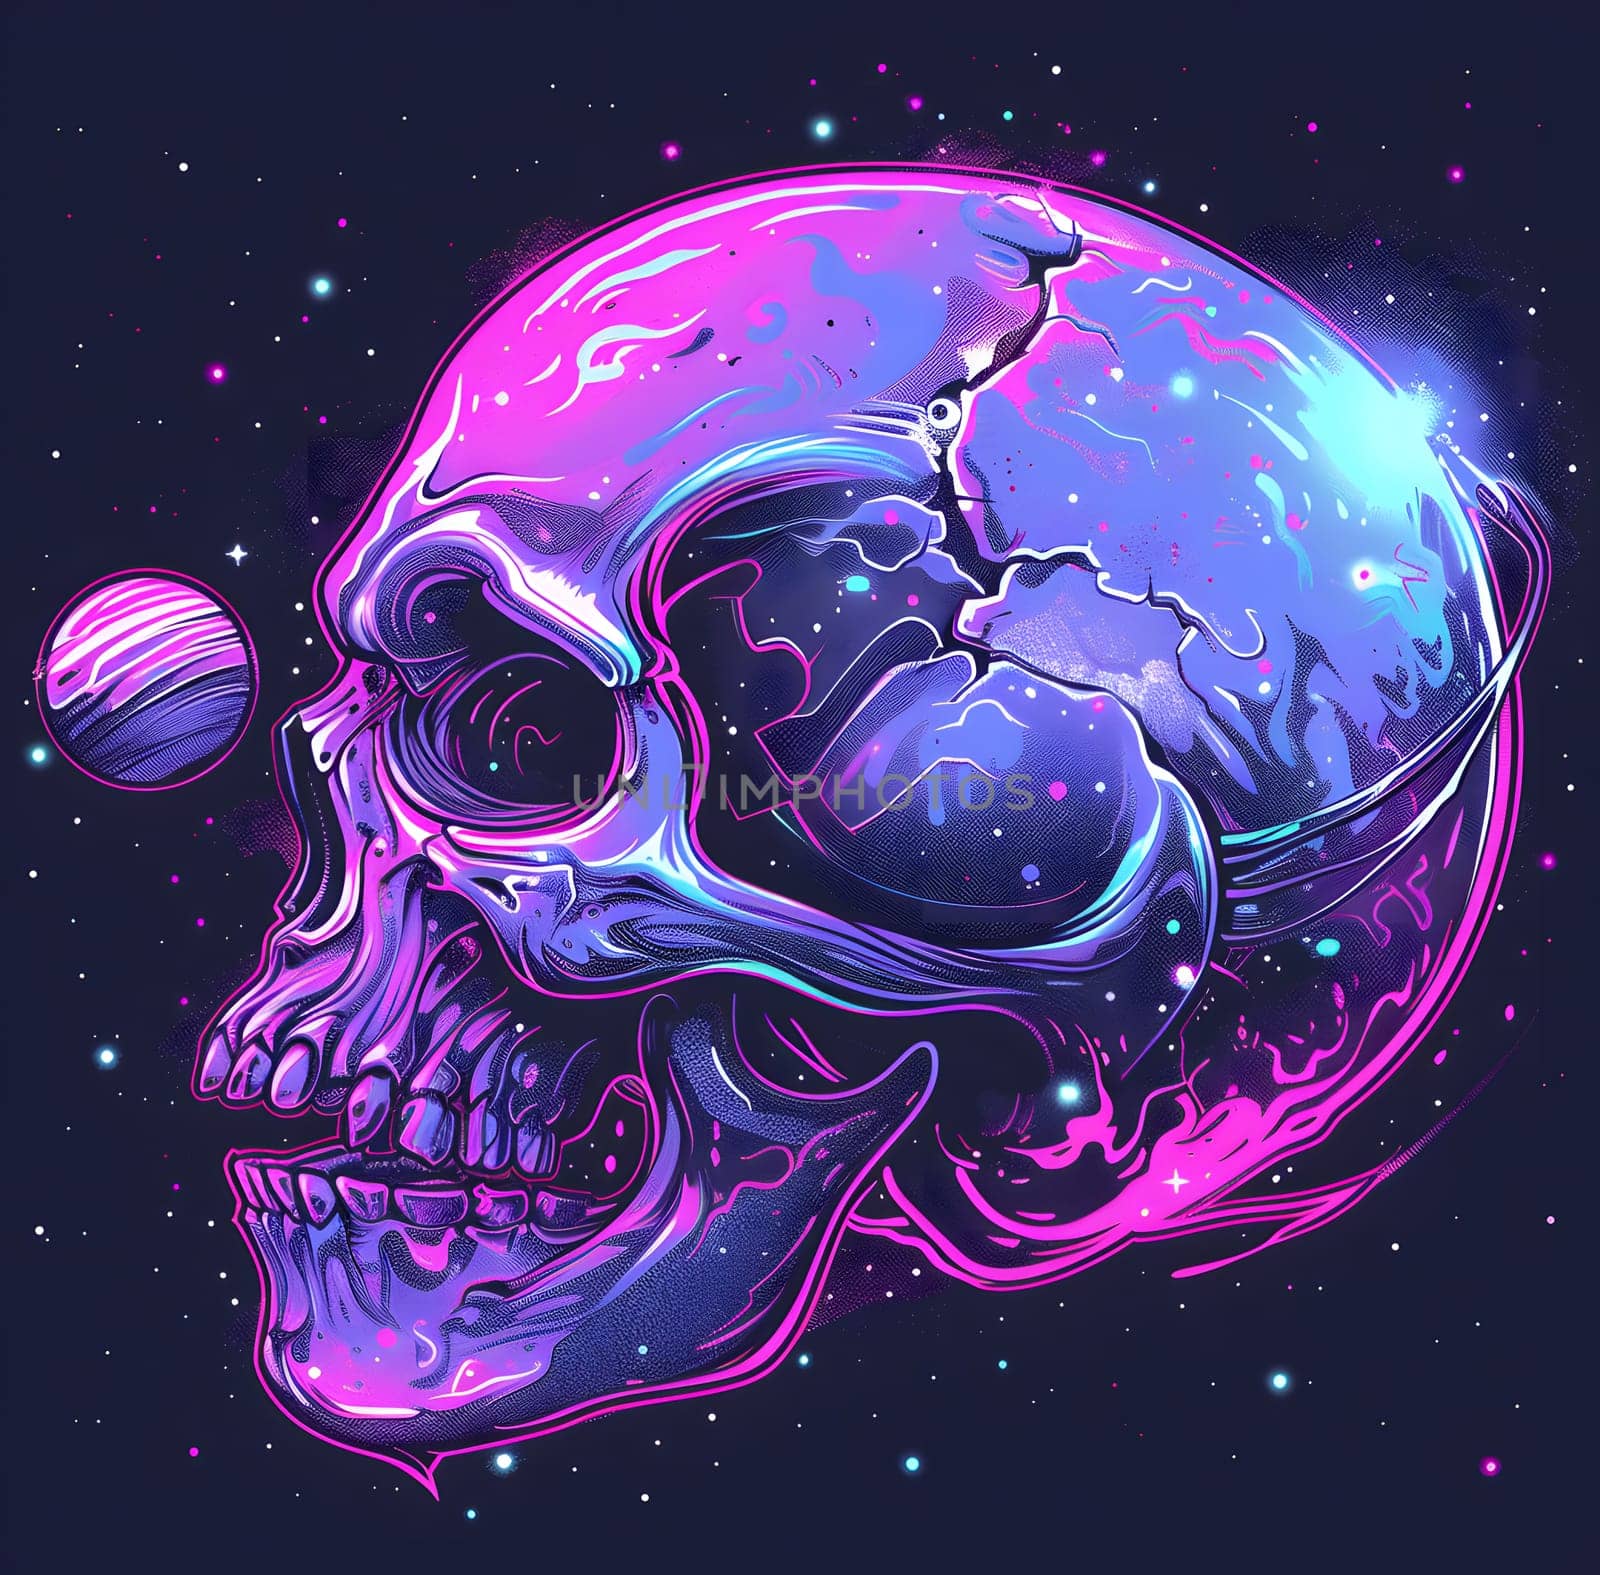 A vibrant skull artwork featuring a purple jaw bone. The background showcases an electric blue planet, creating a unique blend of art and science